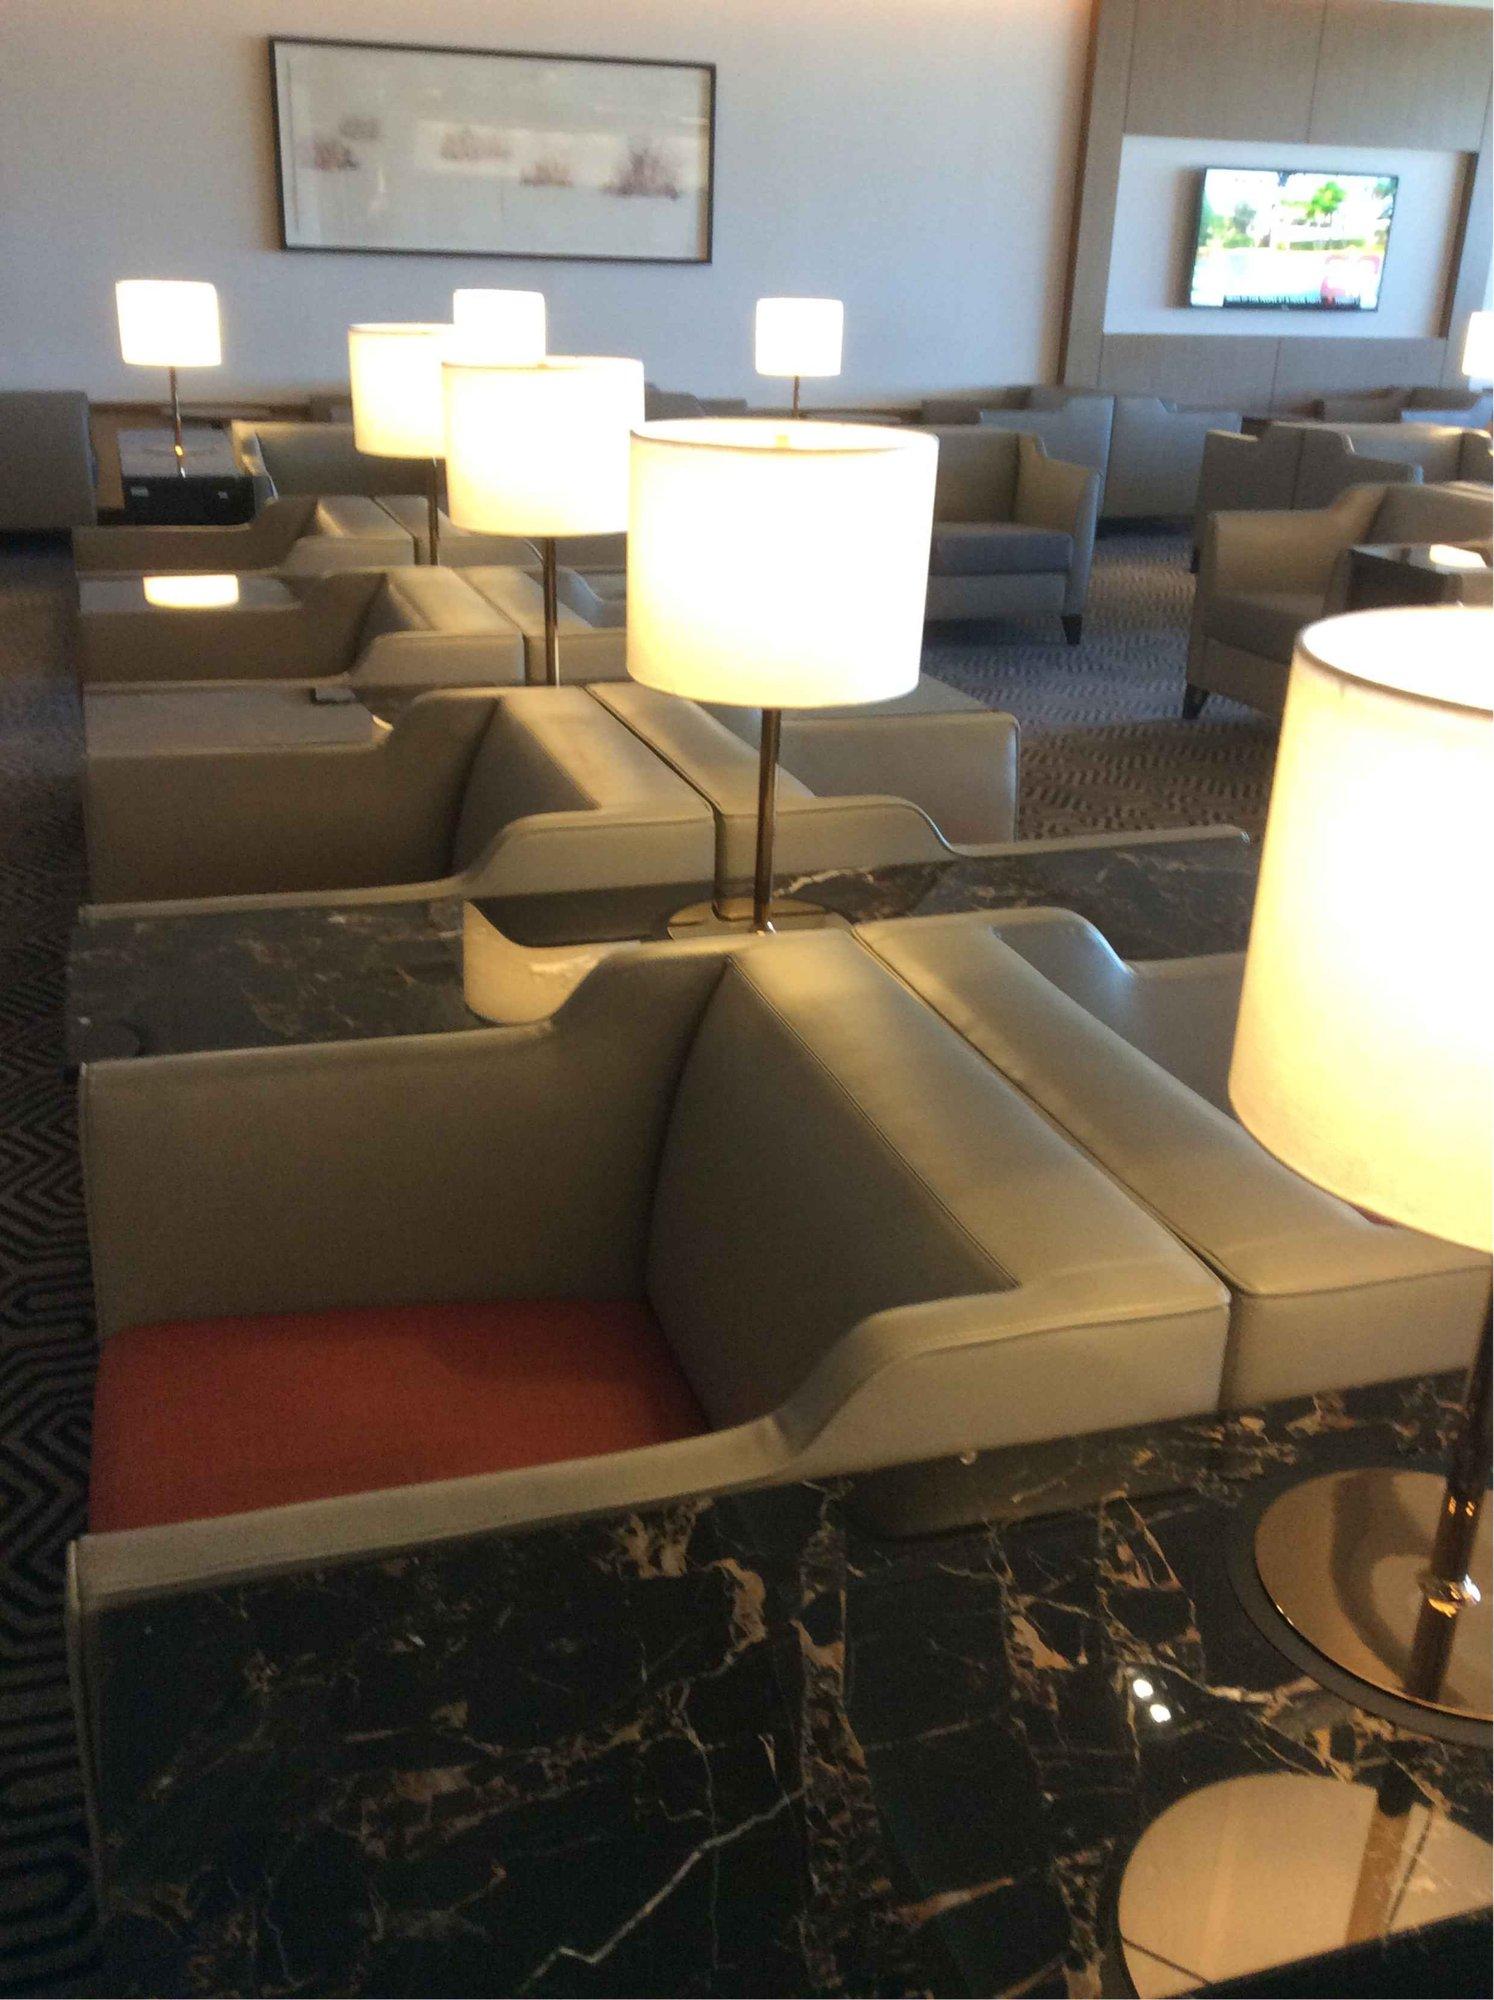 Singapore Airlines SilverKris Business Class Lounge image 5 of 20